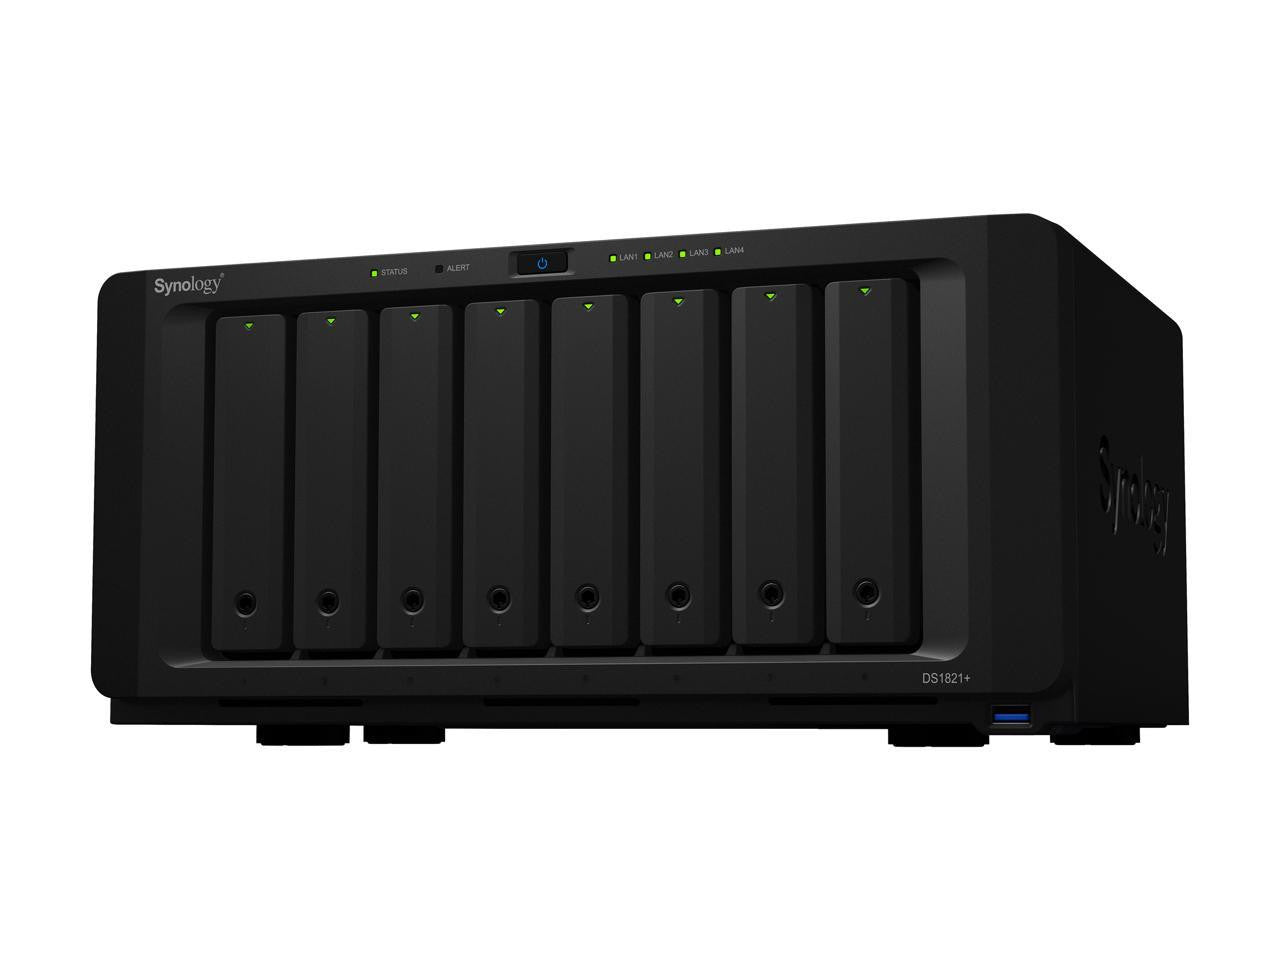 Synology DS1821+ 8-BAY DiskStation with 16GB Synology RAM and 96TB (8x12TB) Western Digital RED PLUS Drives Fully Assembled and Tested